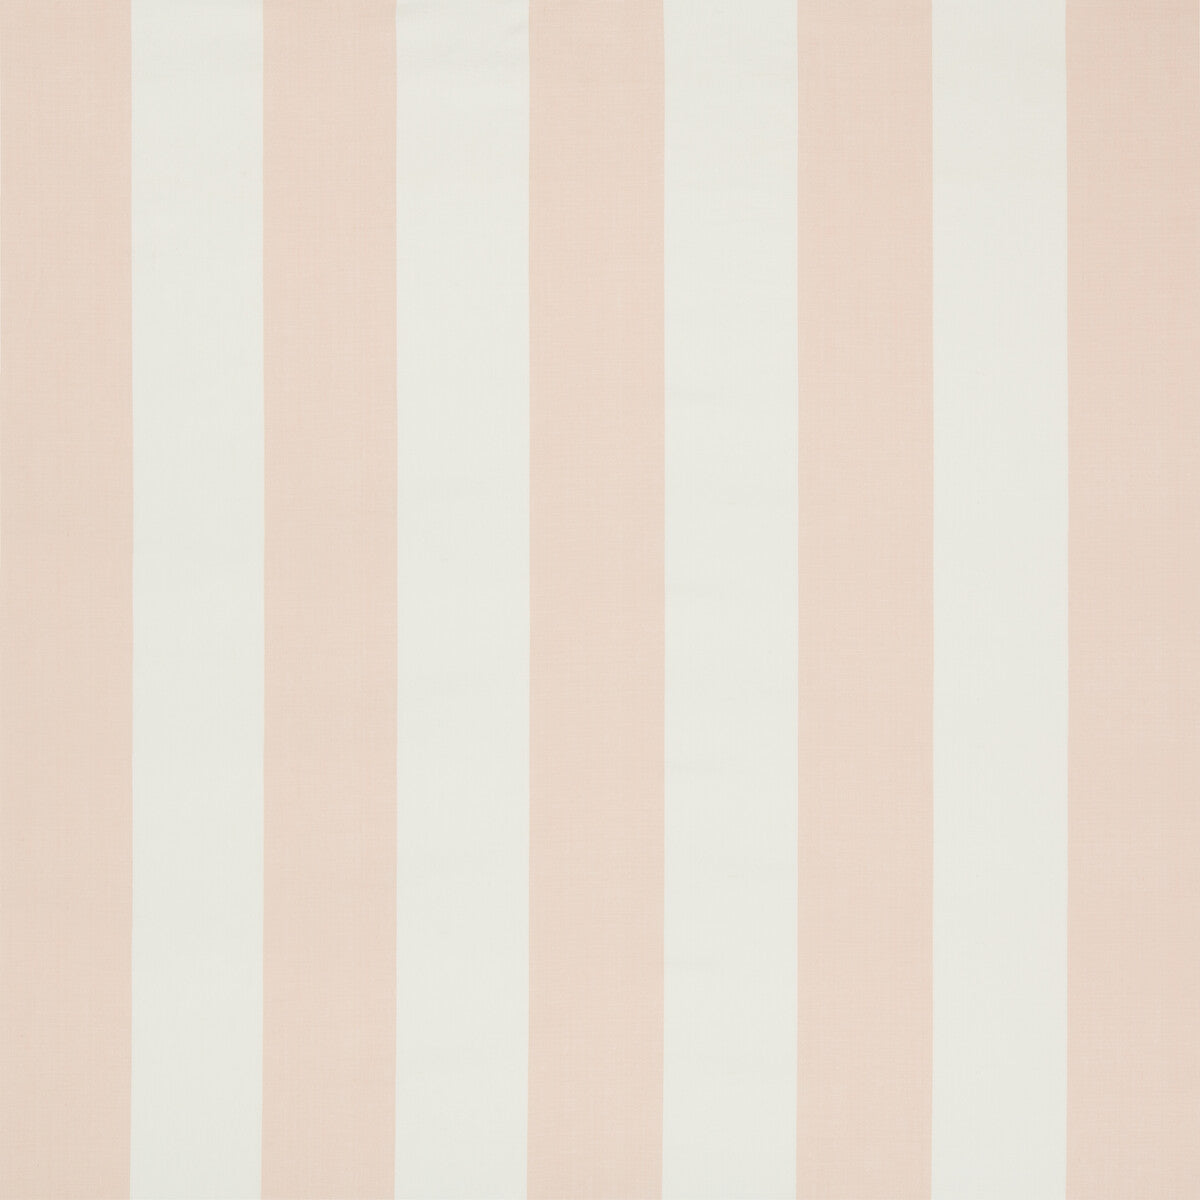 St Croix Stripe fabric in pink color - pattern 2018145.17.0 - by Lee Jofa in the Suzanne Kasler The Riviera collection